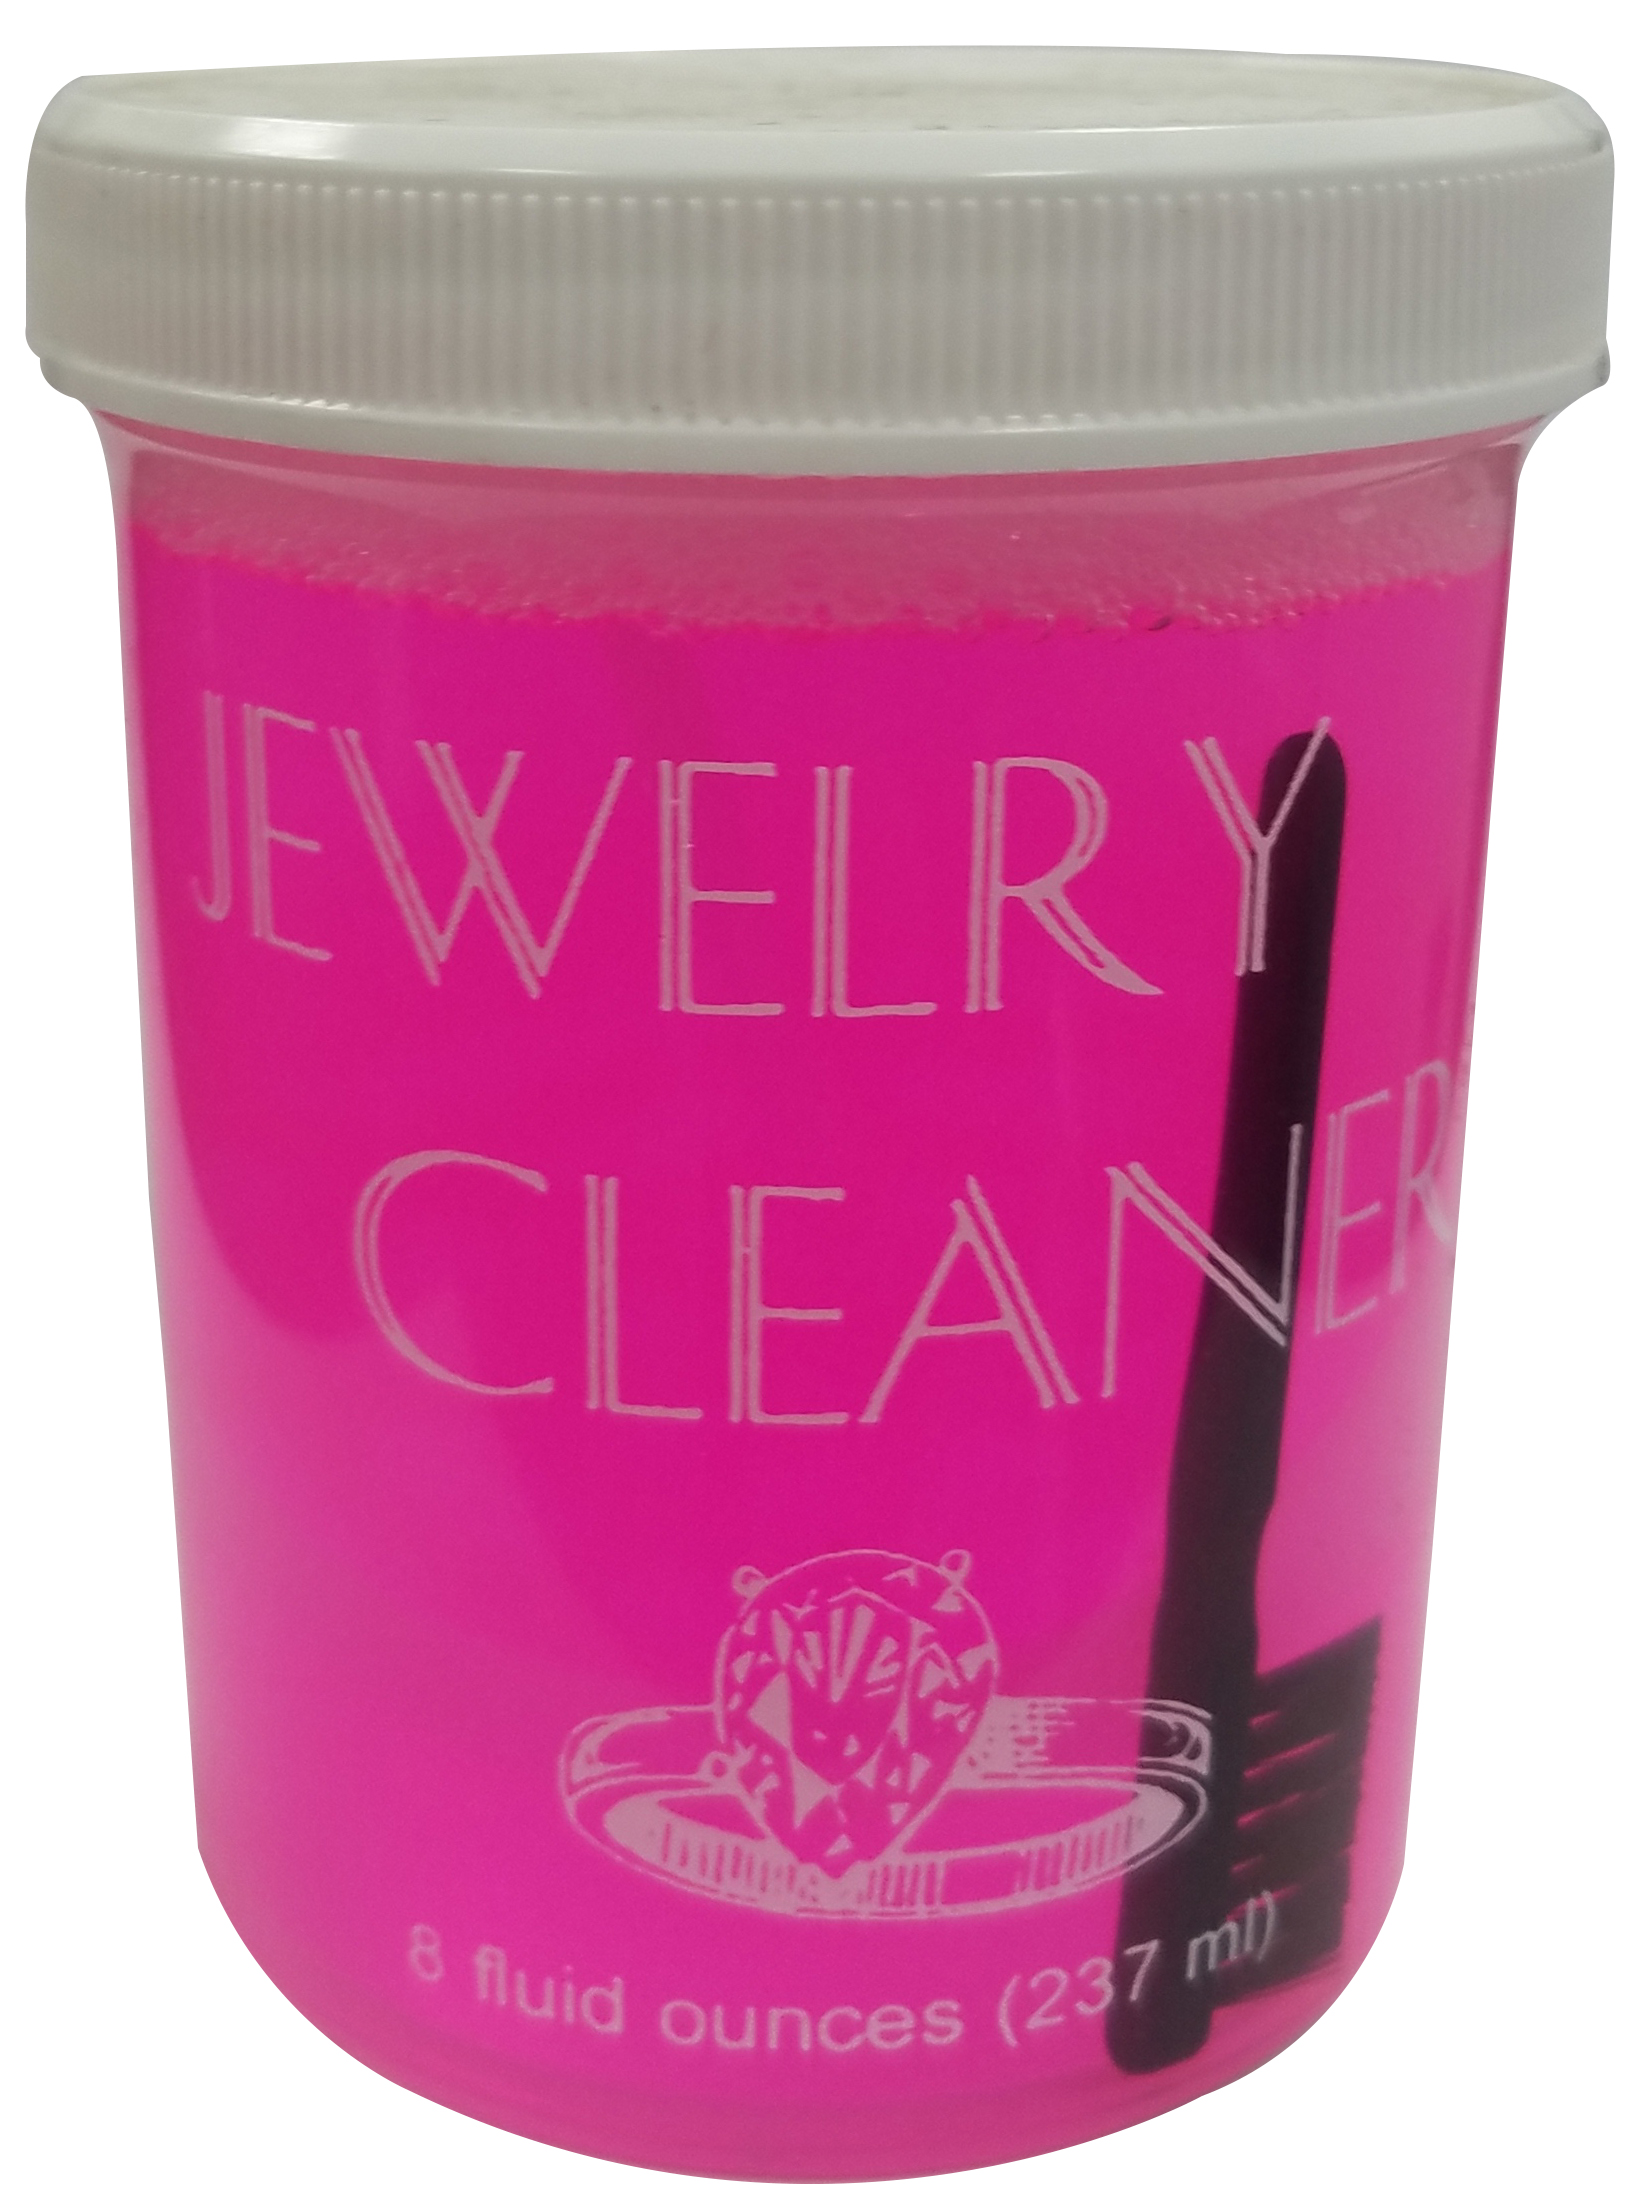 JEWELRY CLEANER/PINK, 8 ounces with basket & brush (Non Ammoniated) - Click Image to Close